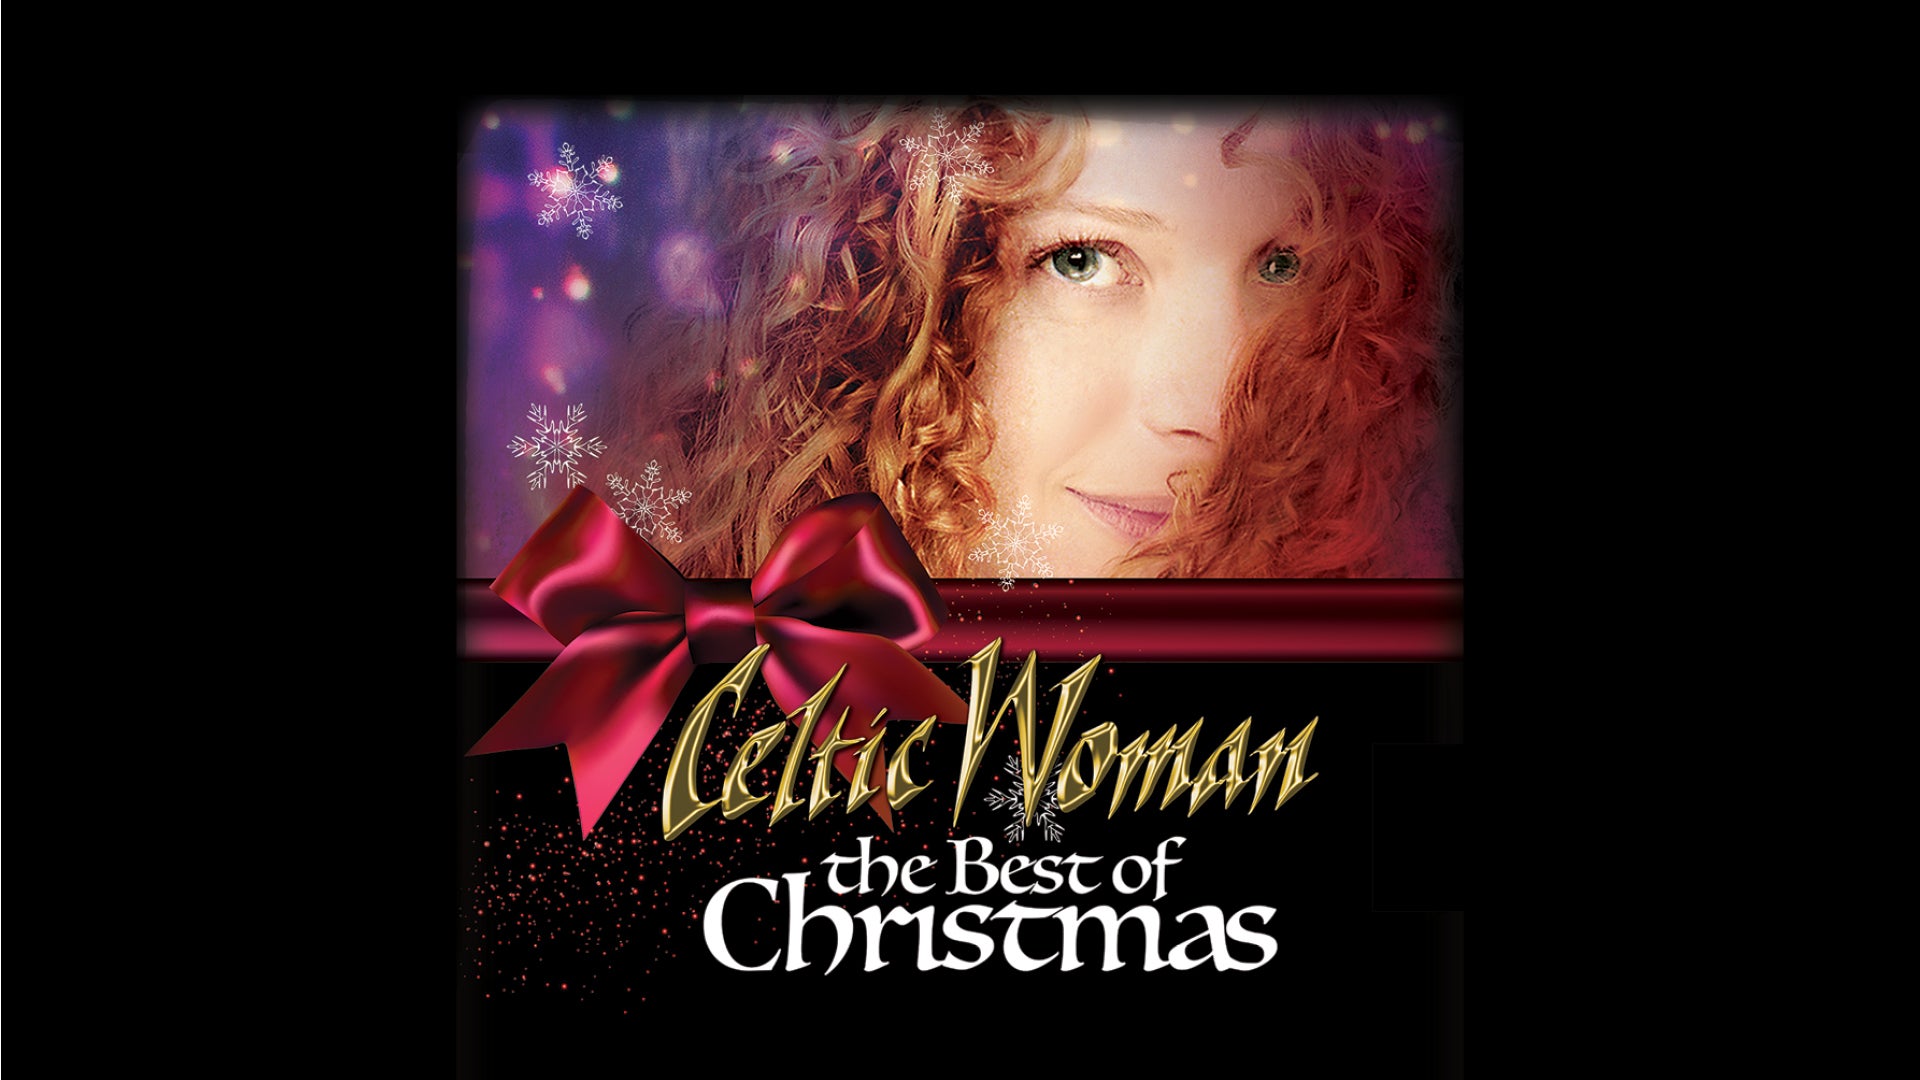 Celtic Woman: The Best of Christmas Tour